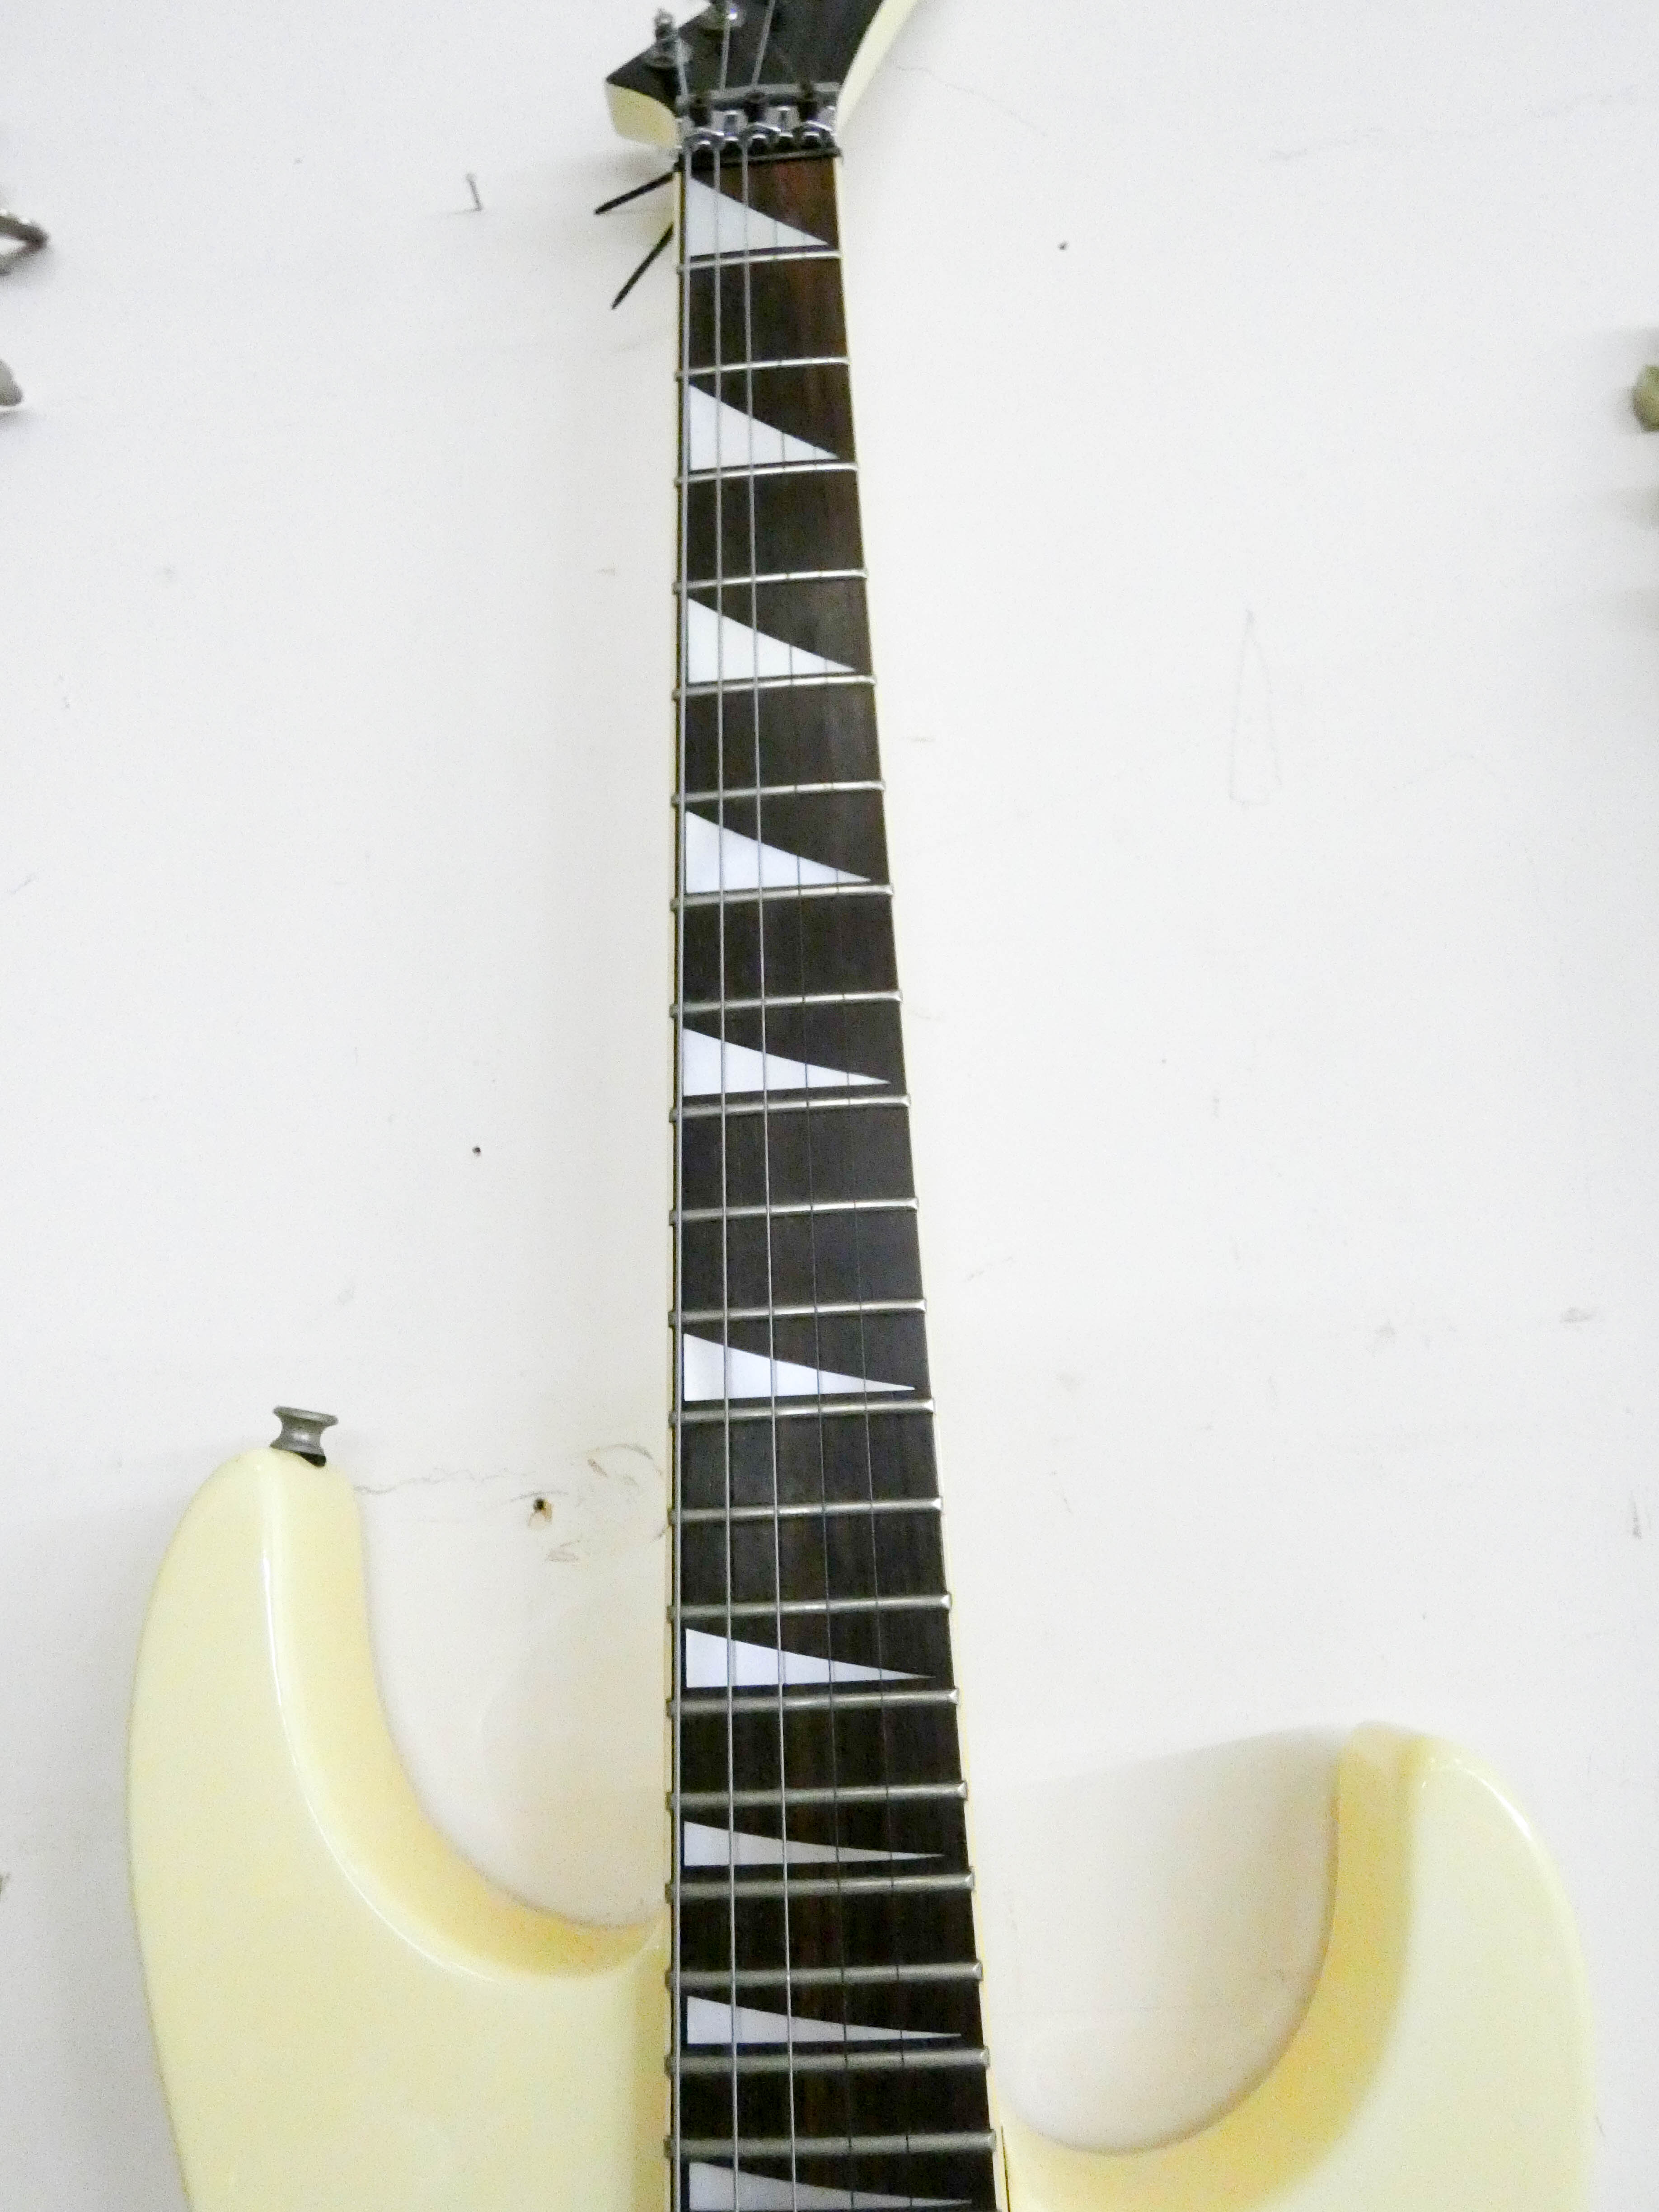 An Aria Pro 2 AC3TS electric guitar with soft carrying case - Image 4 of 5